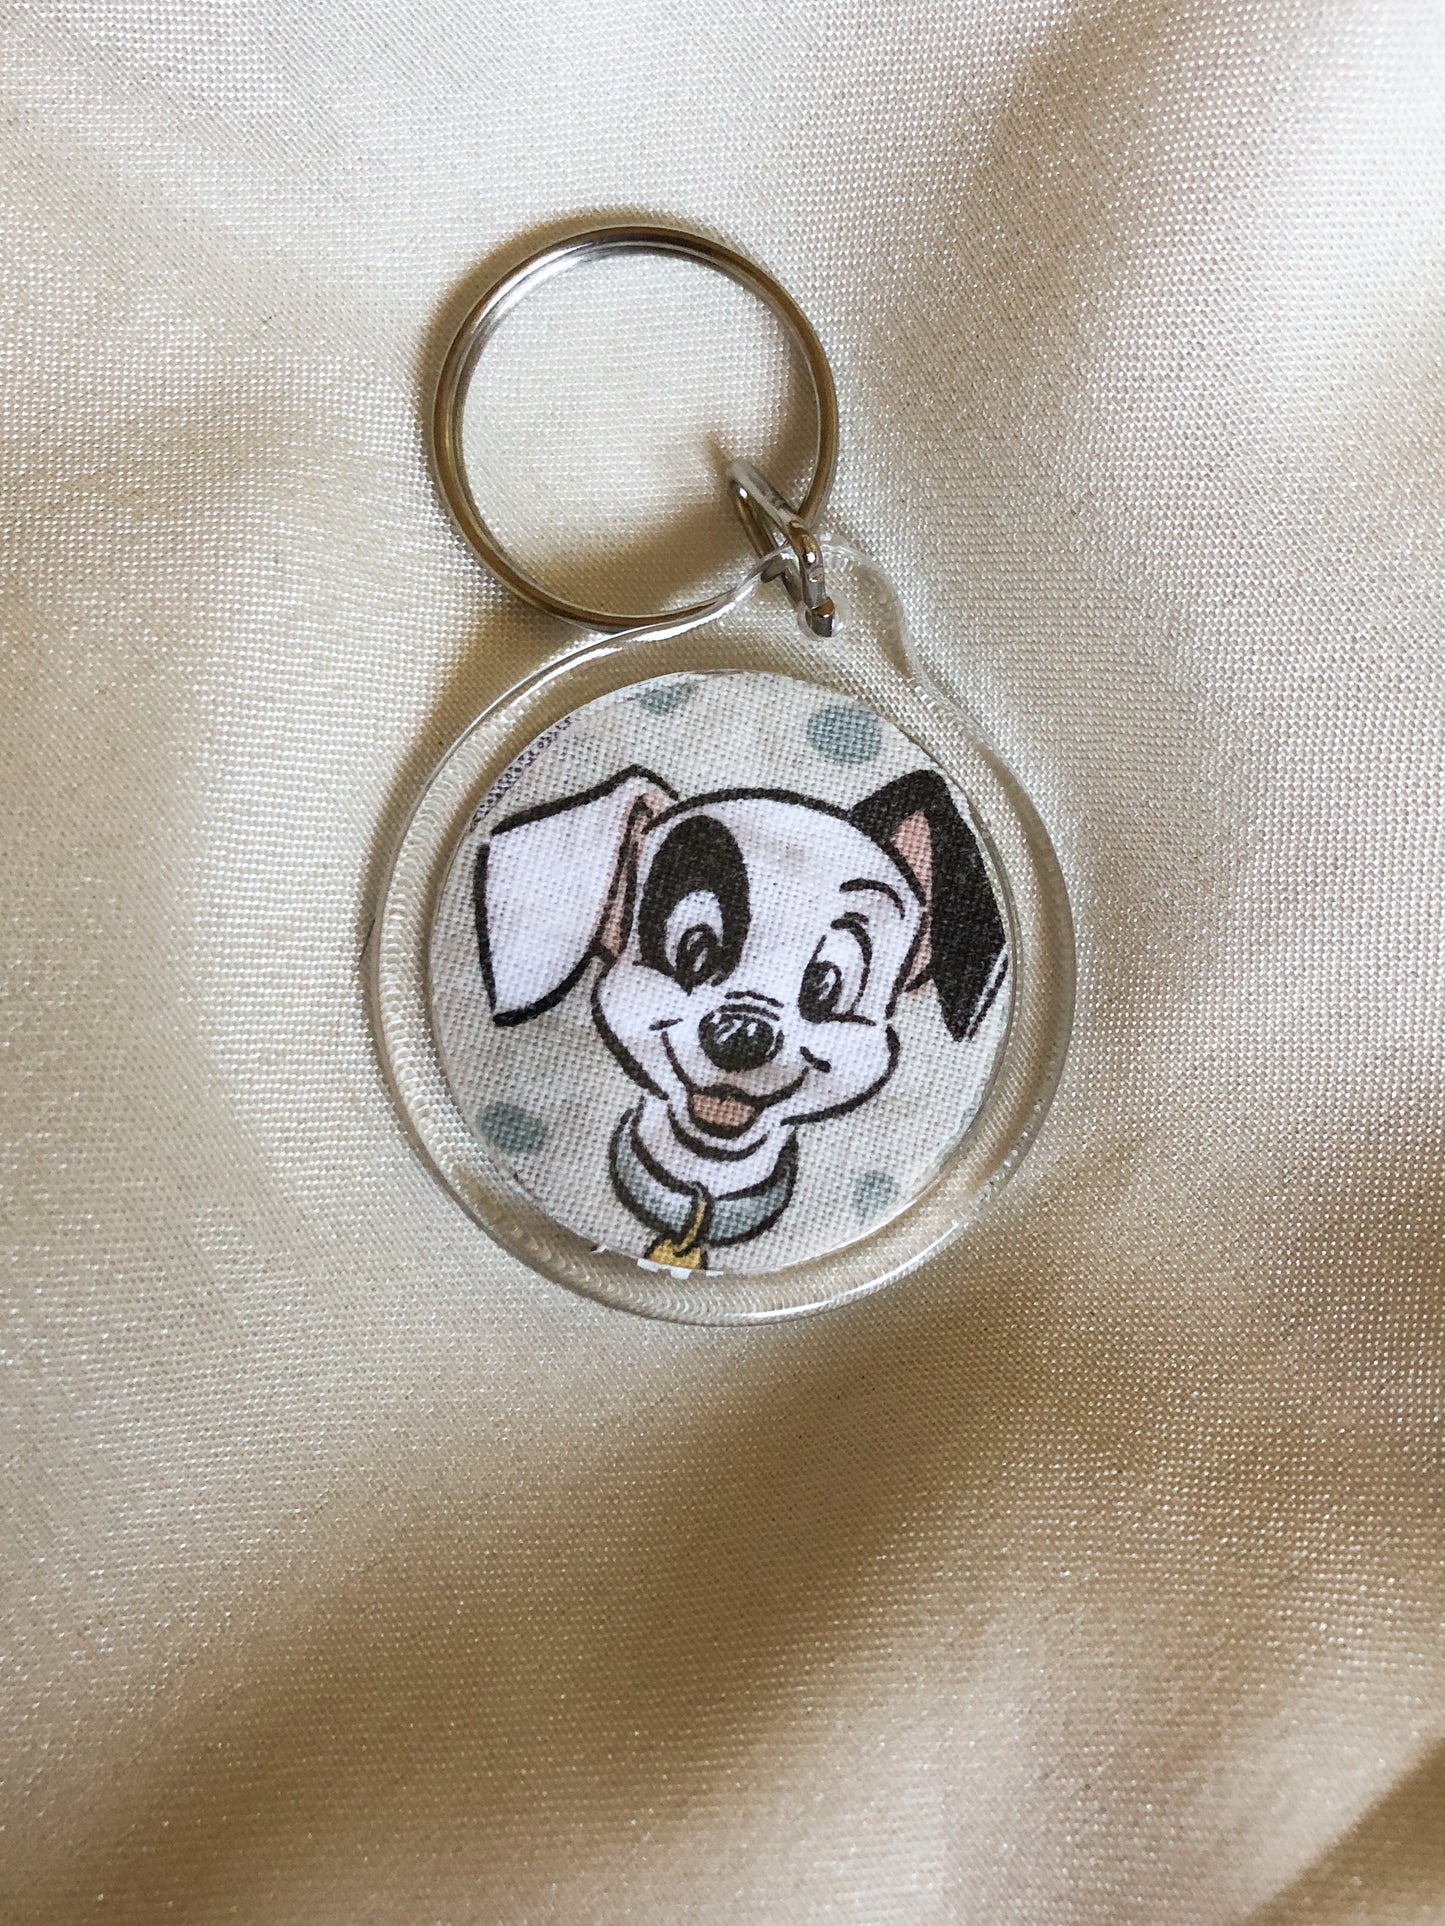 Circle Keyring - Patch Puppy Dalmatian Dog - Upcycled - Duo Design